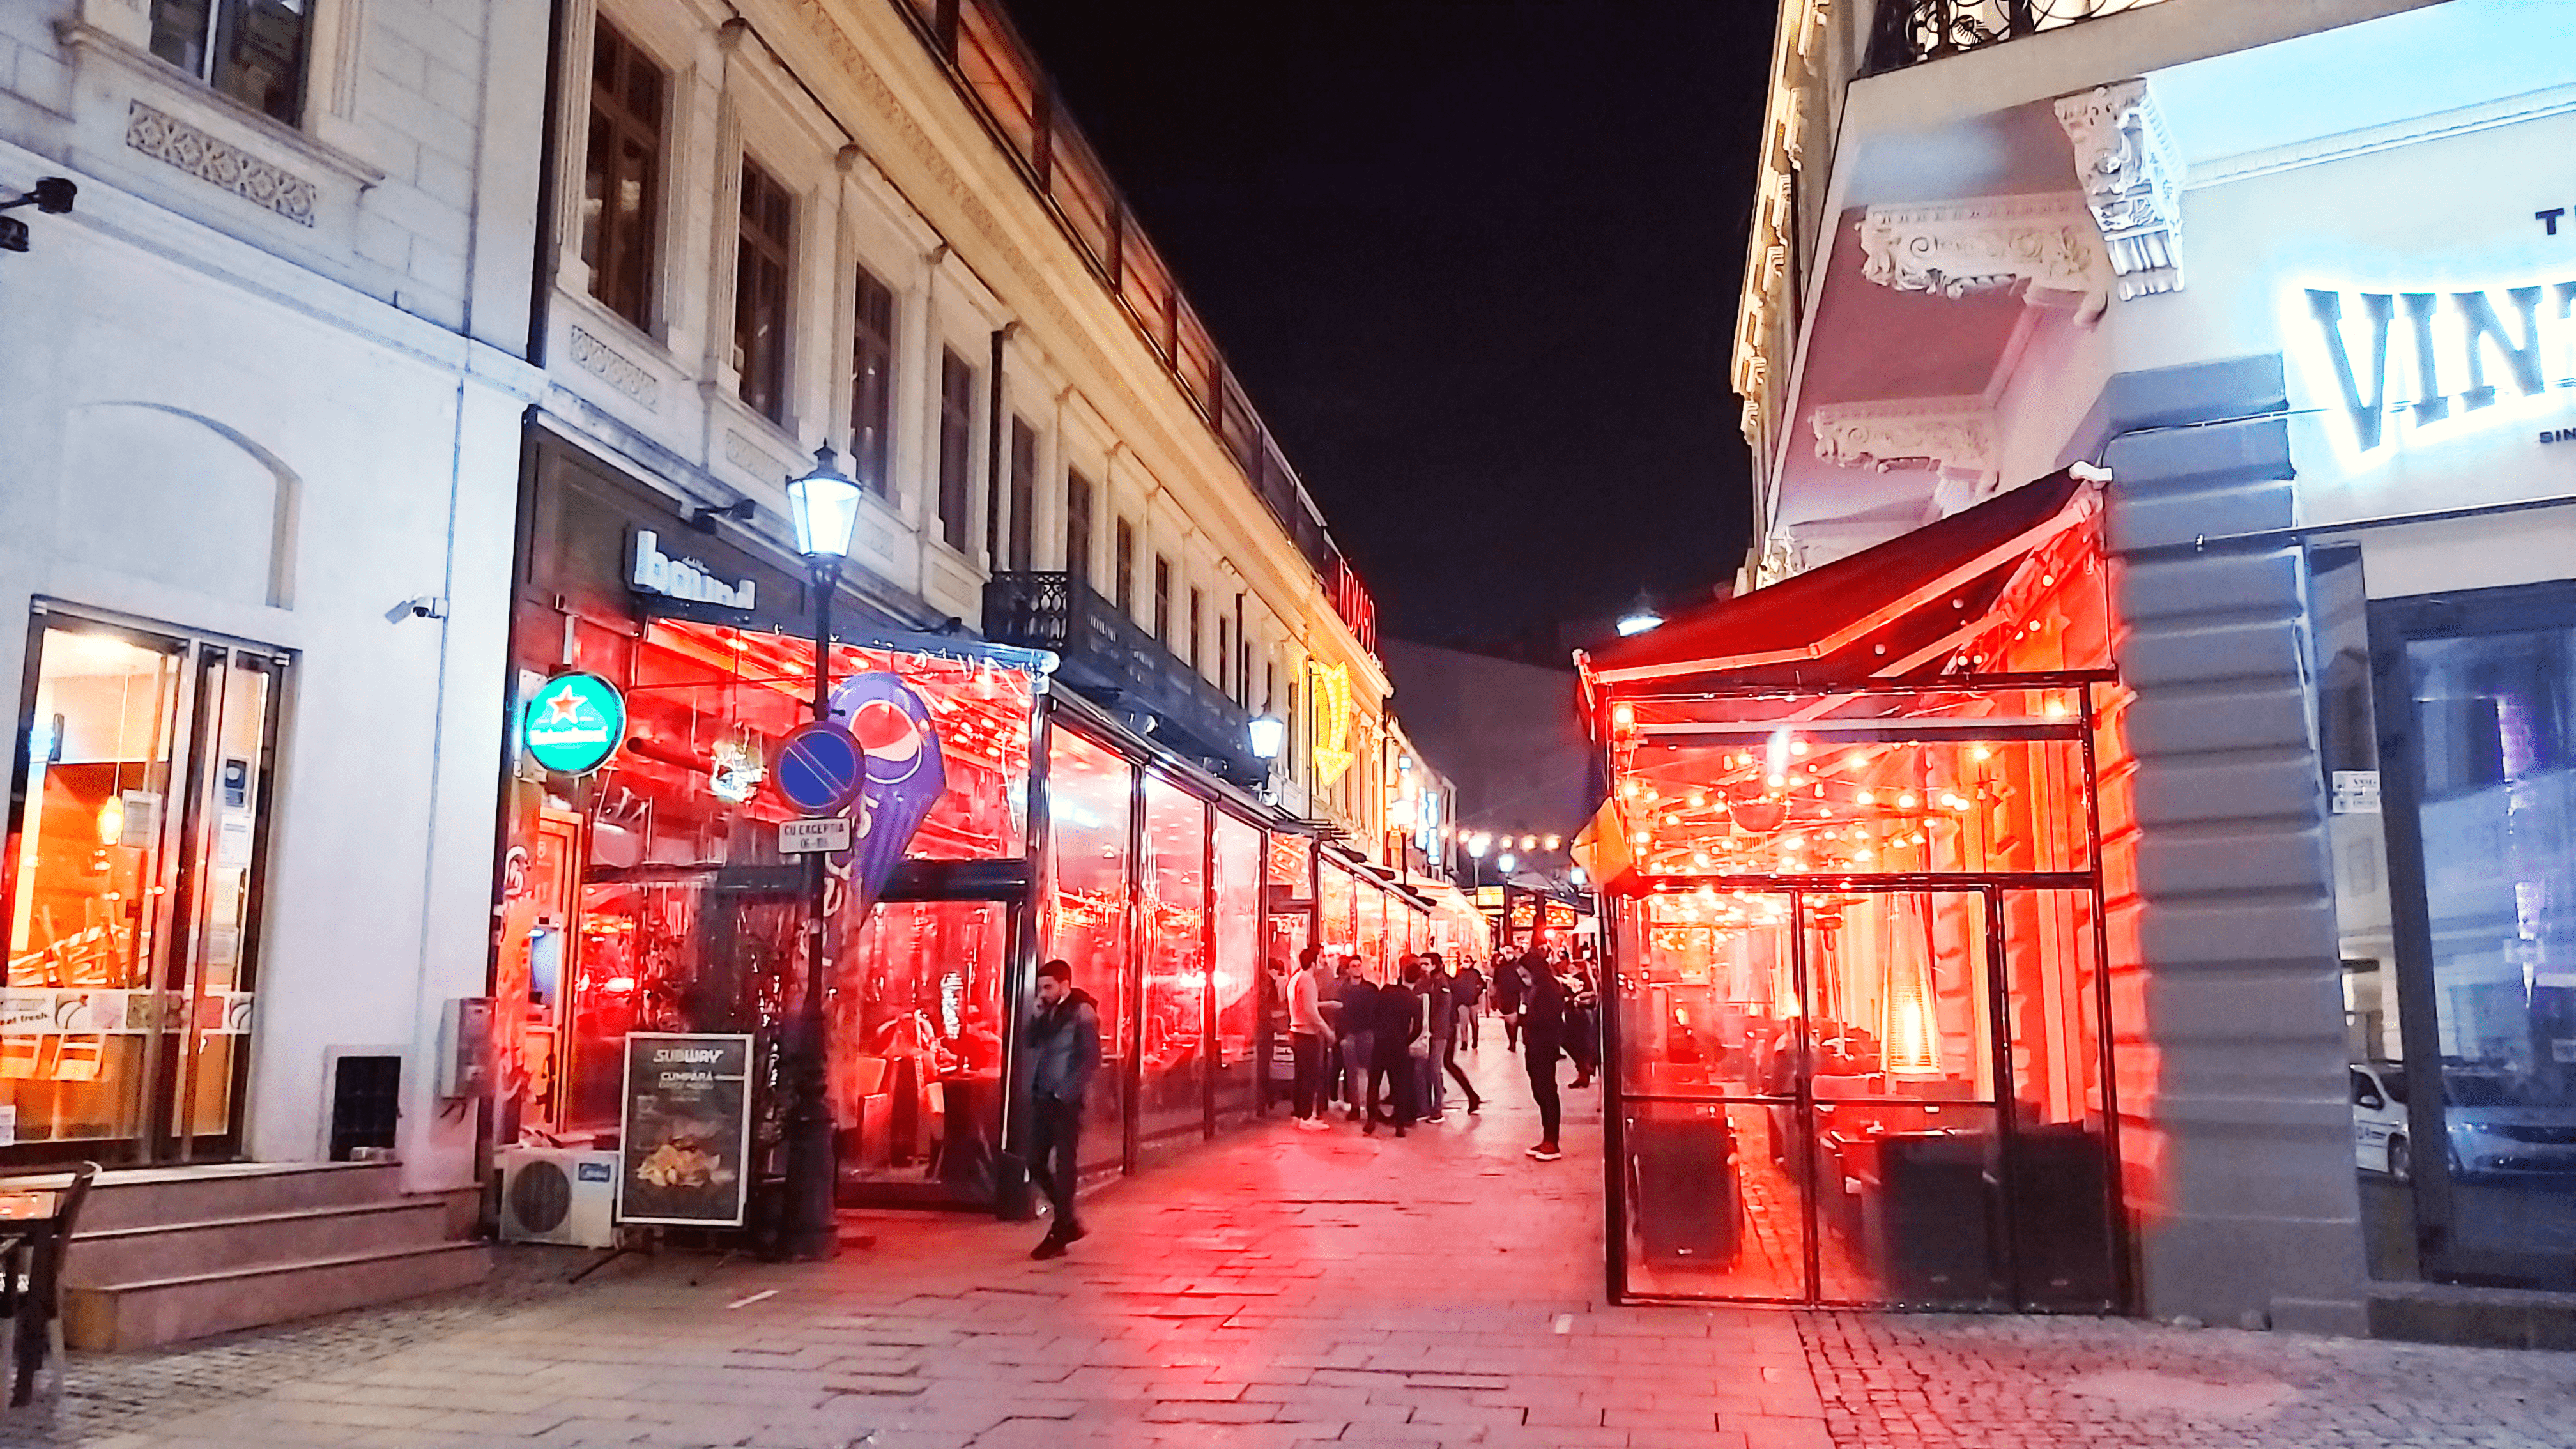 Bucharest Old Town at night